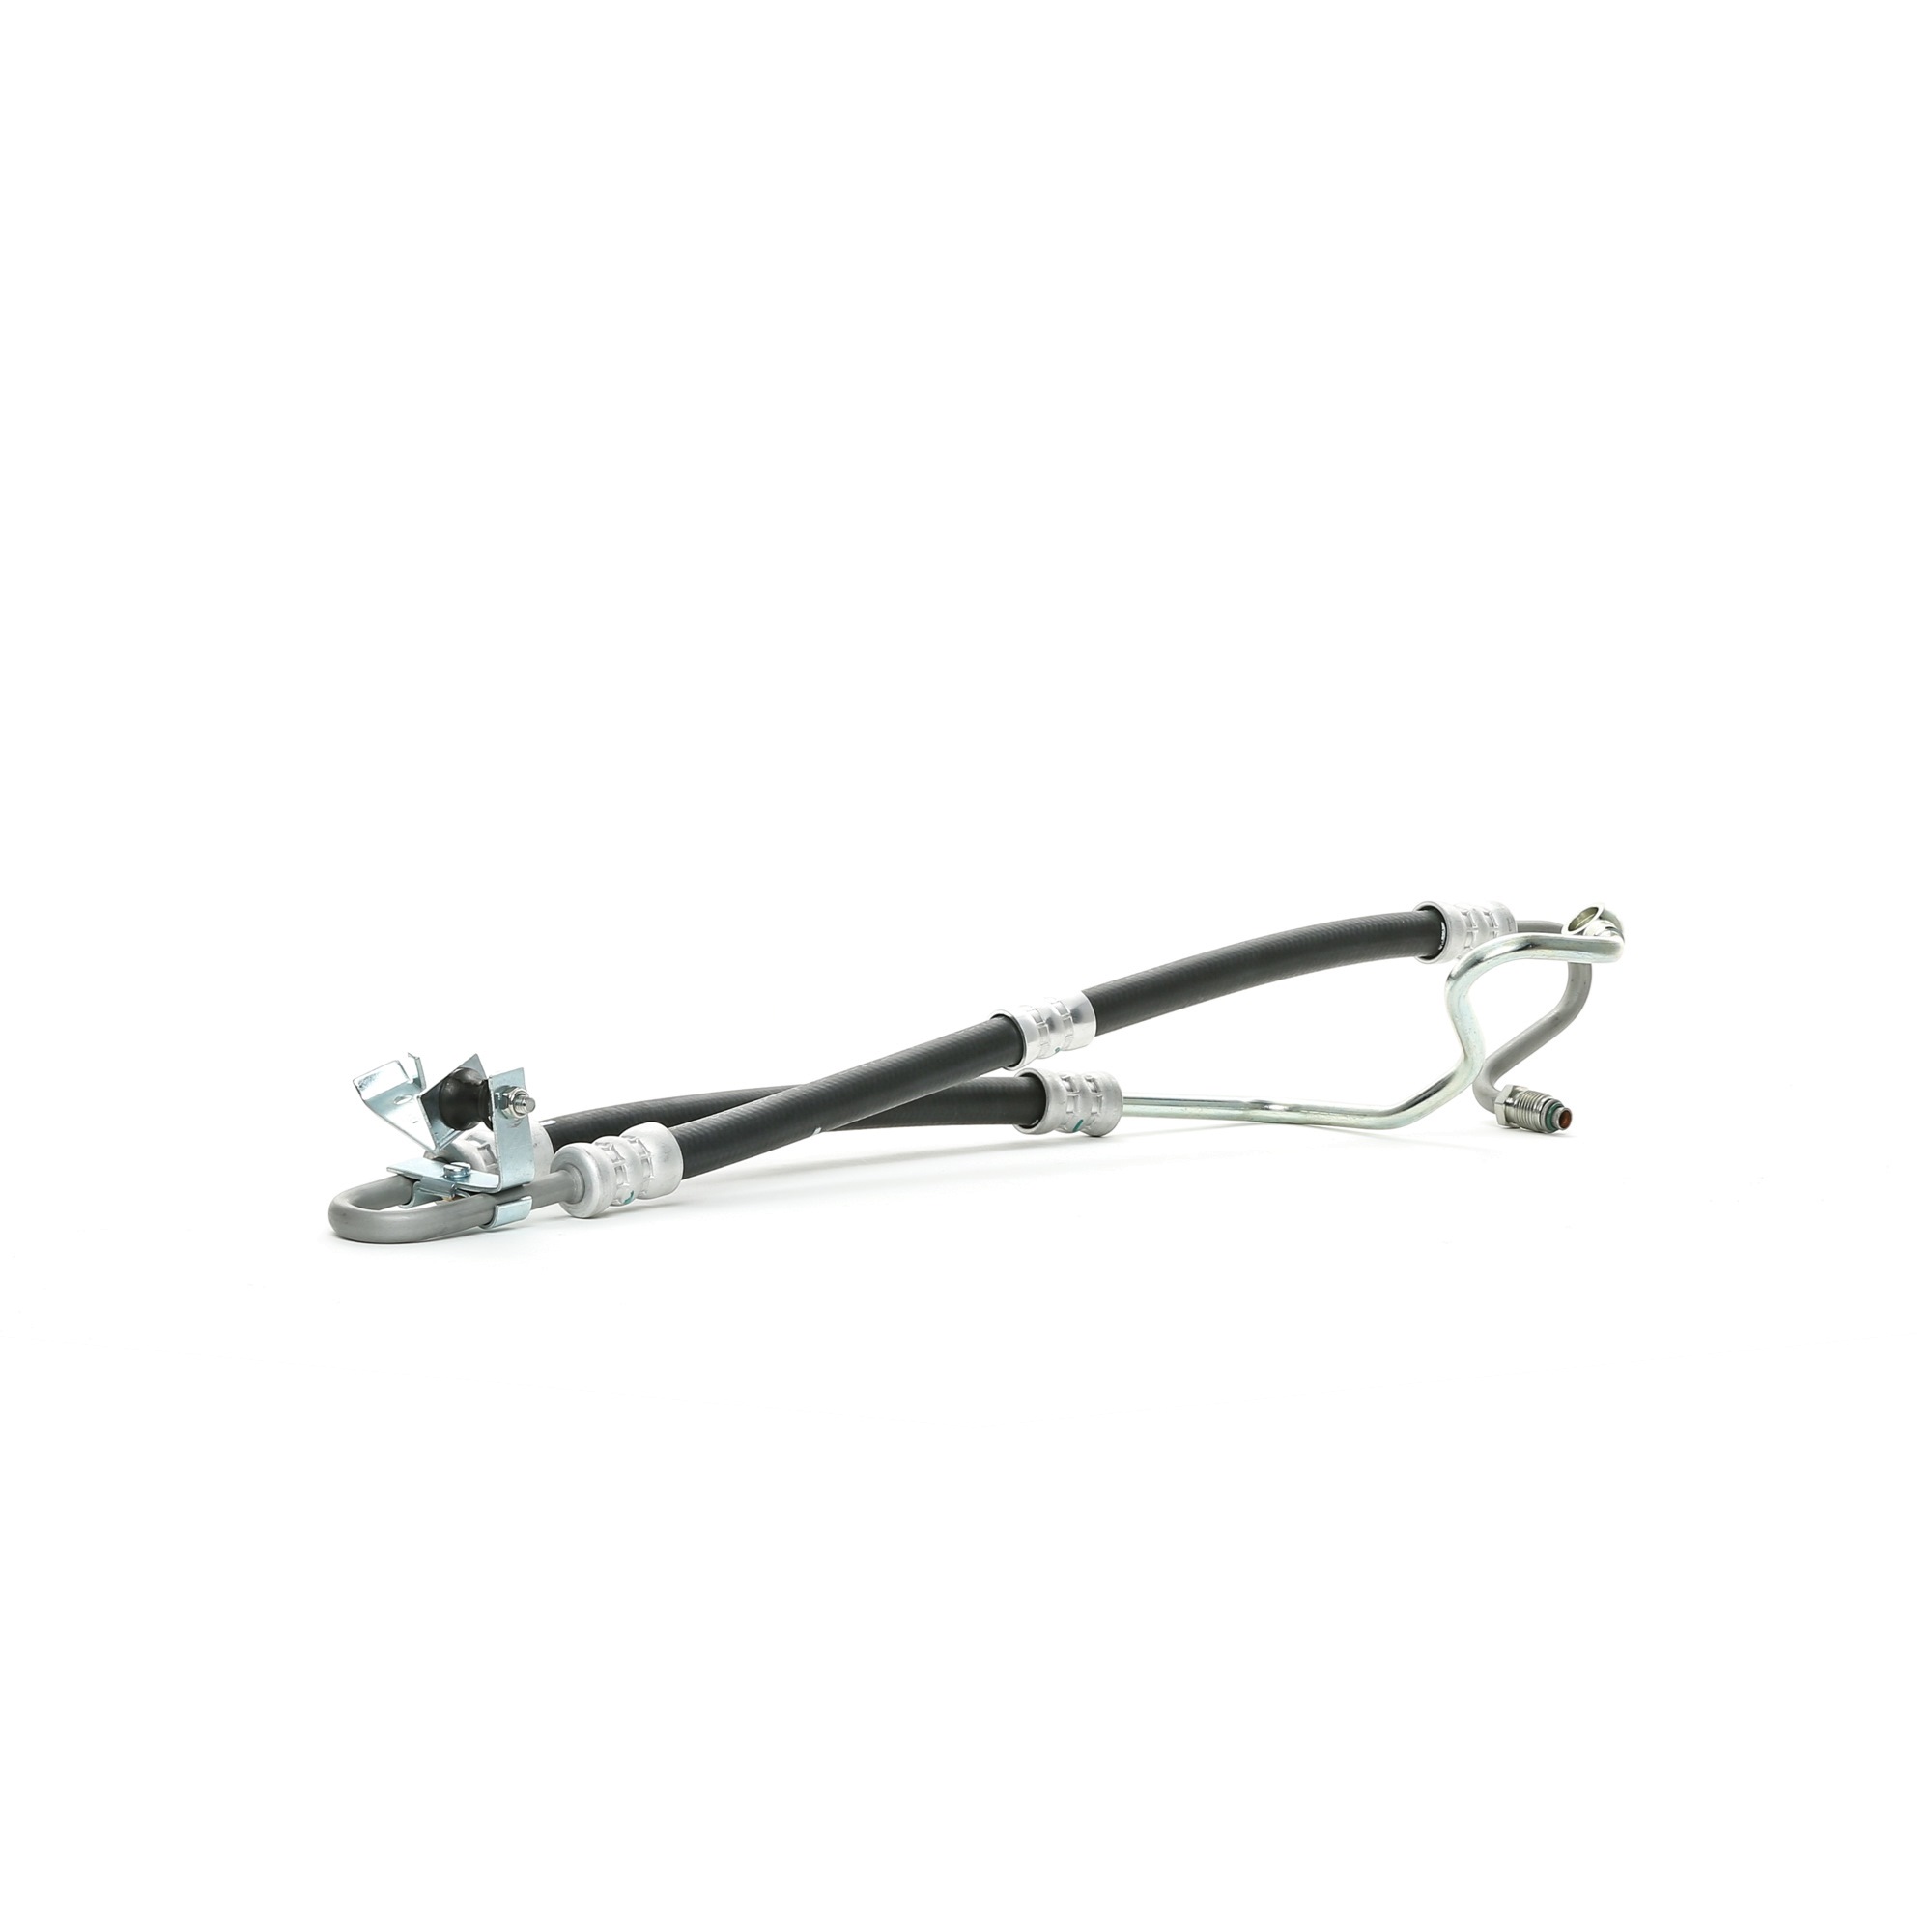 Hydraulic hose steering system STARK from hydraulic pump to steering gear - SKHH-2020007